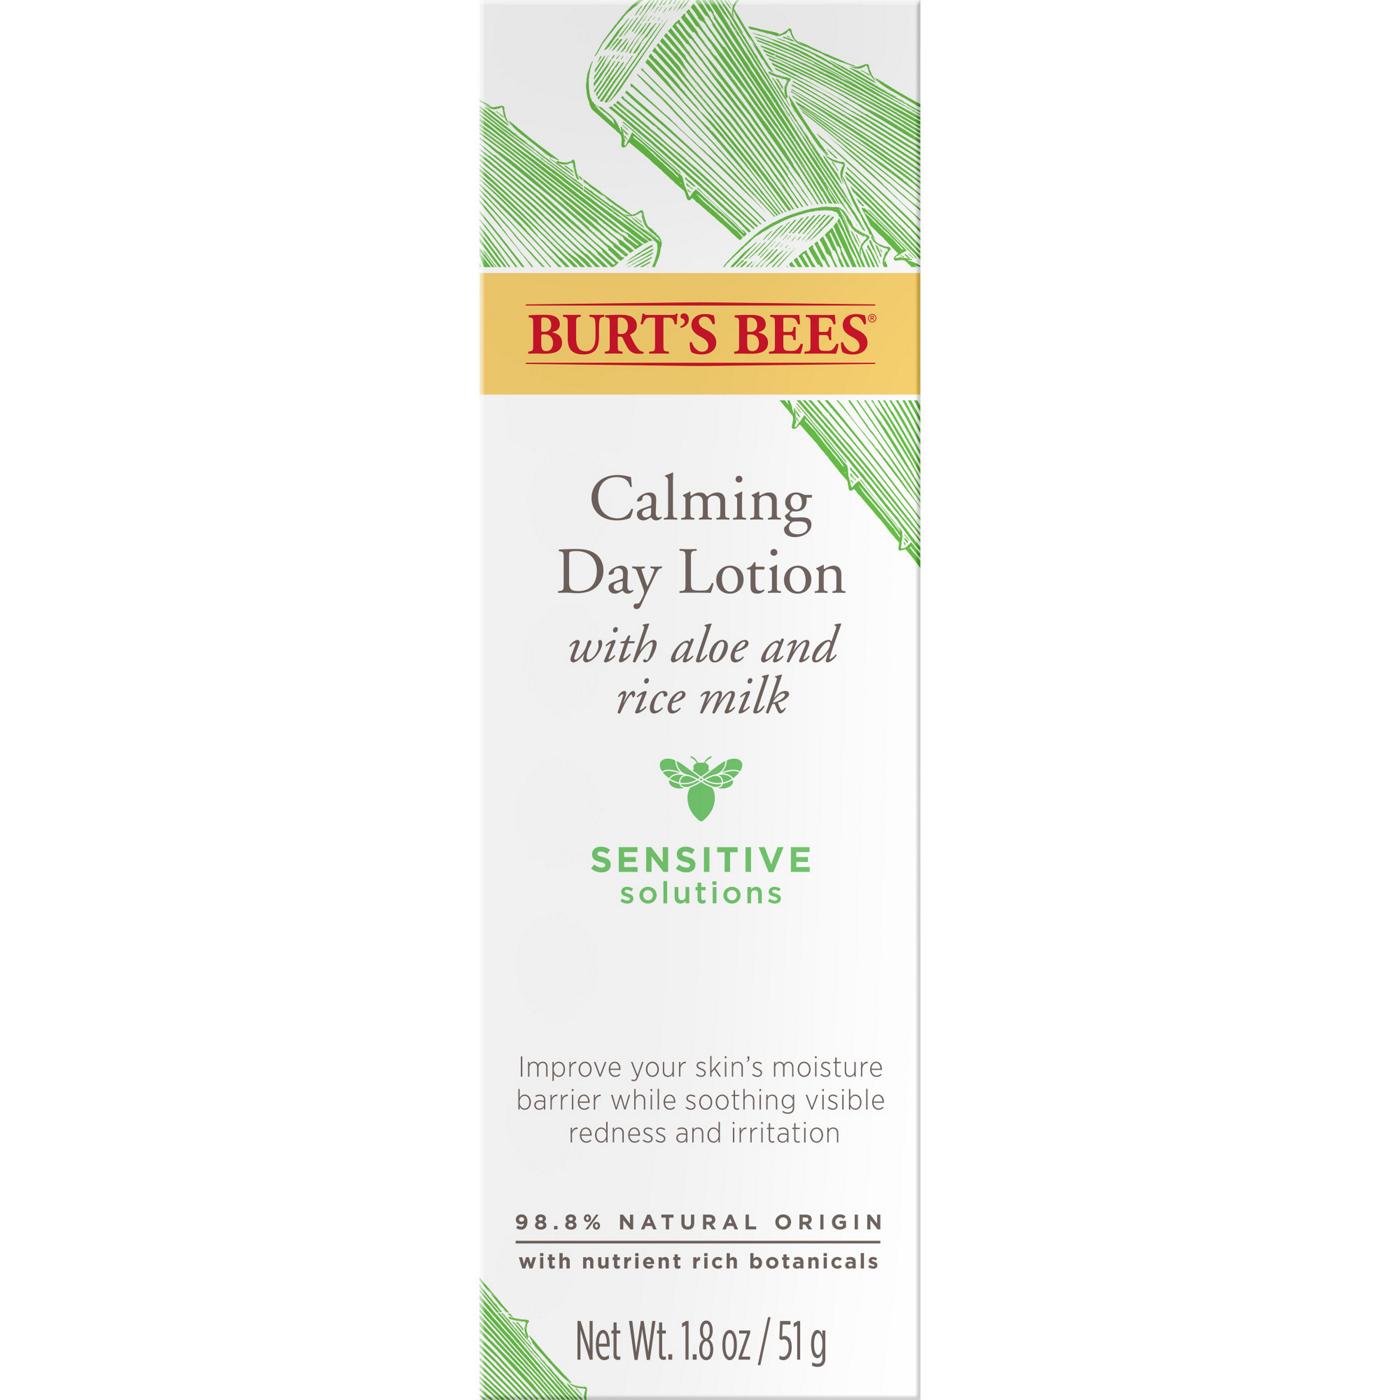 Burt's Bees Sensitive Solutions Calming Day Lotion; image 1 of 5